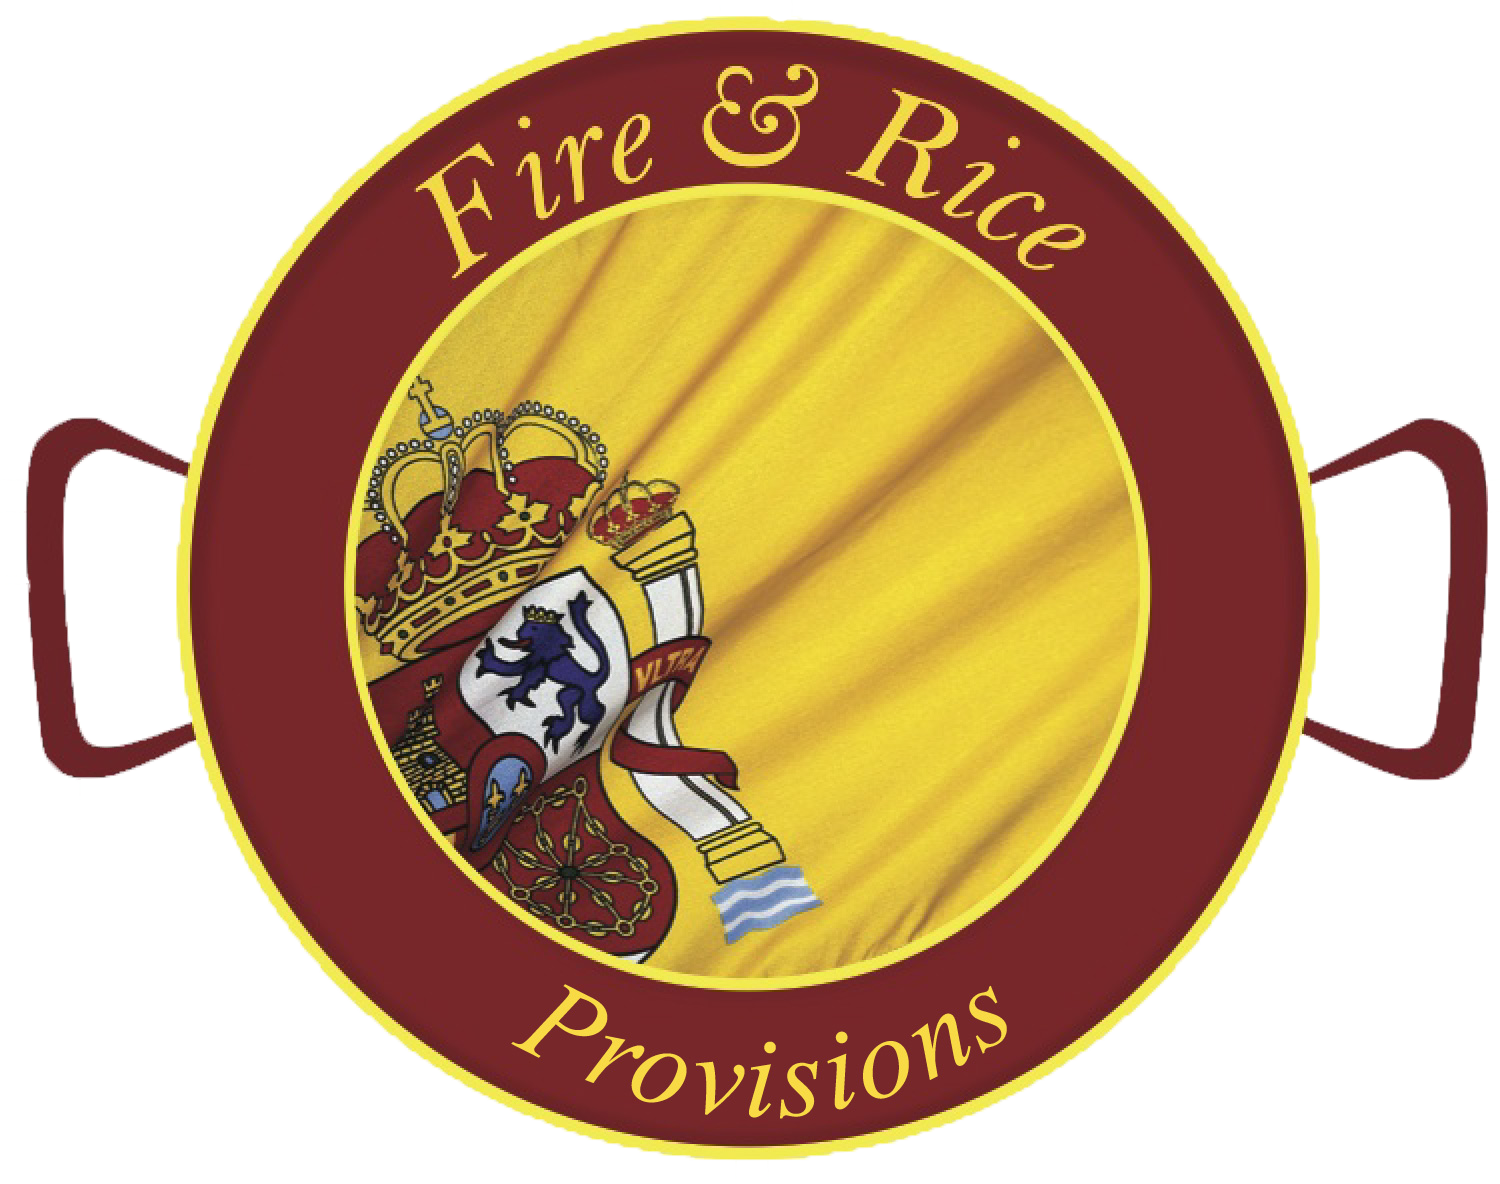 Fire & Rice Provisions